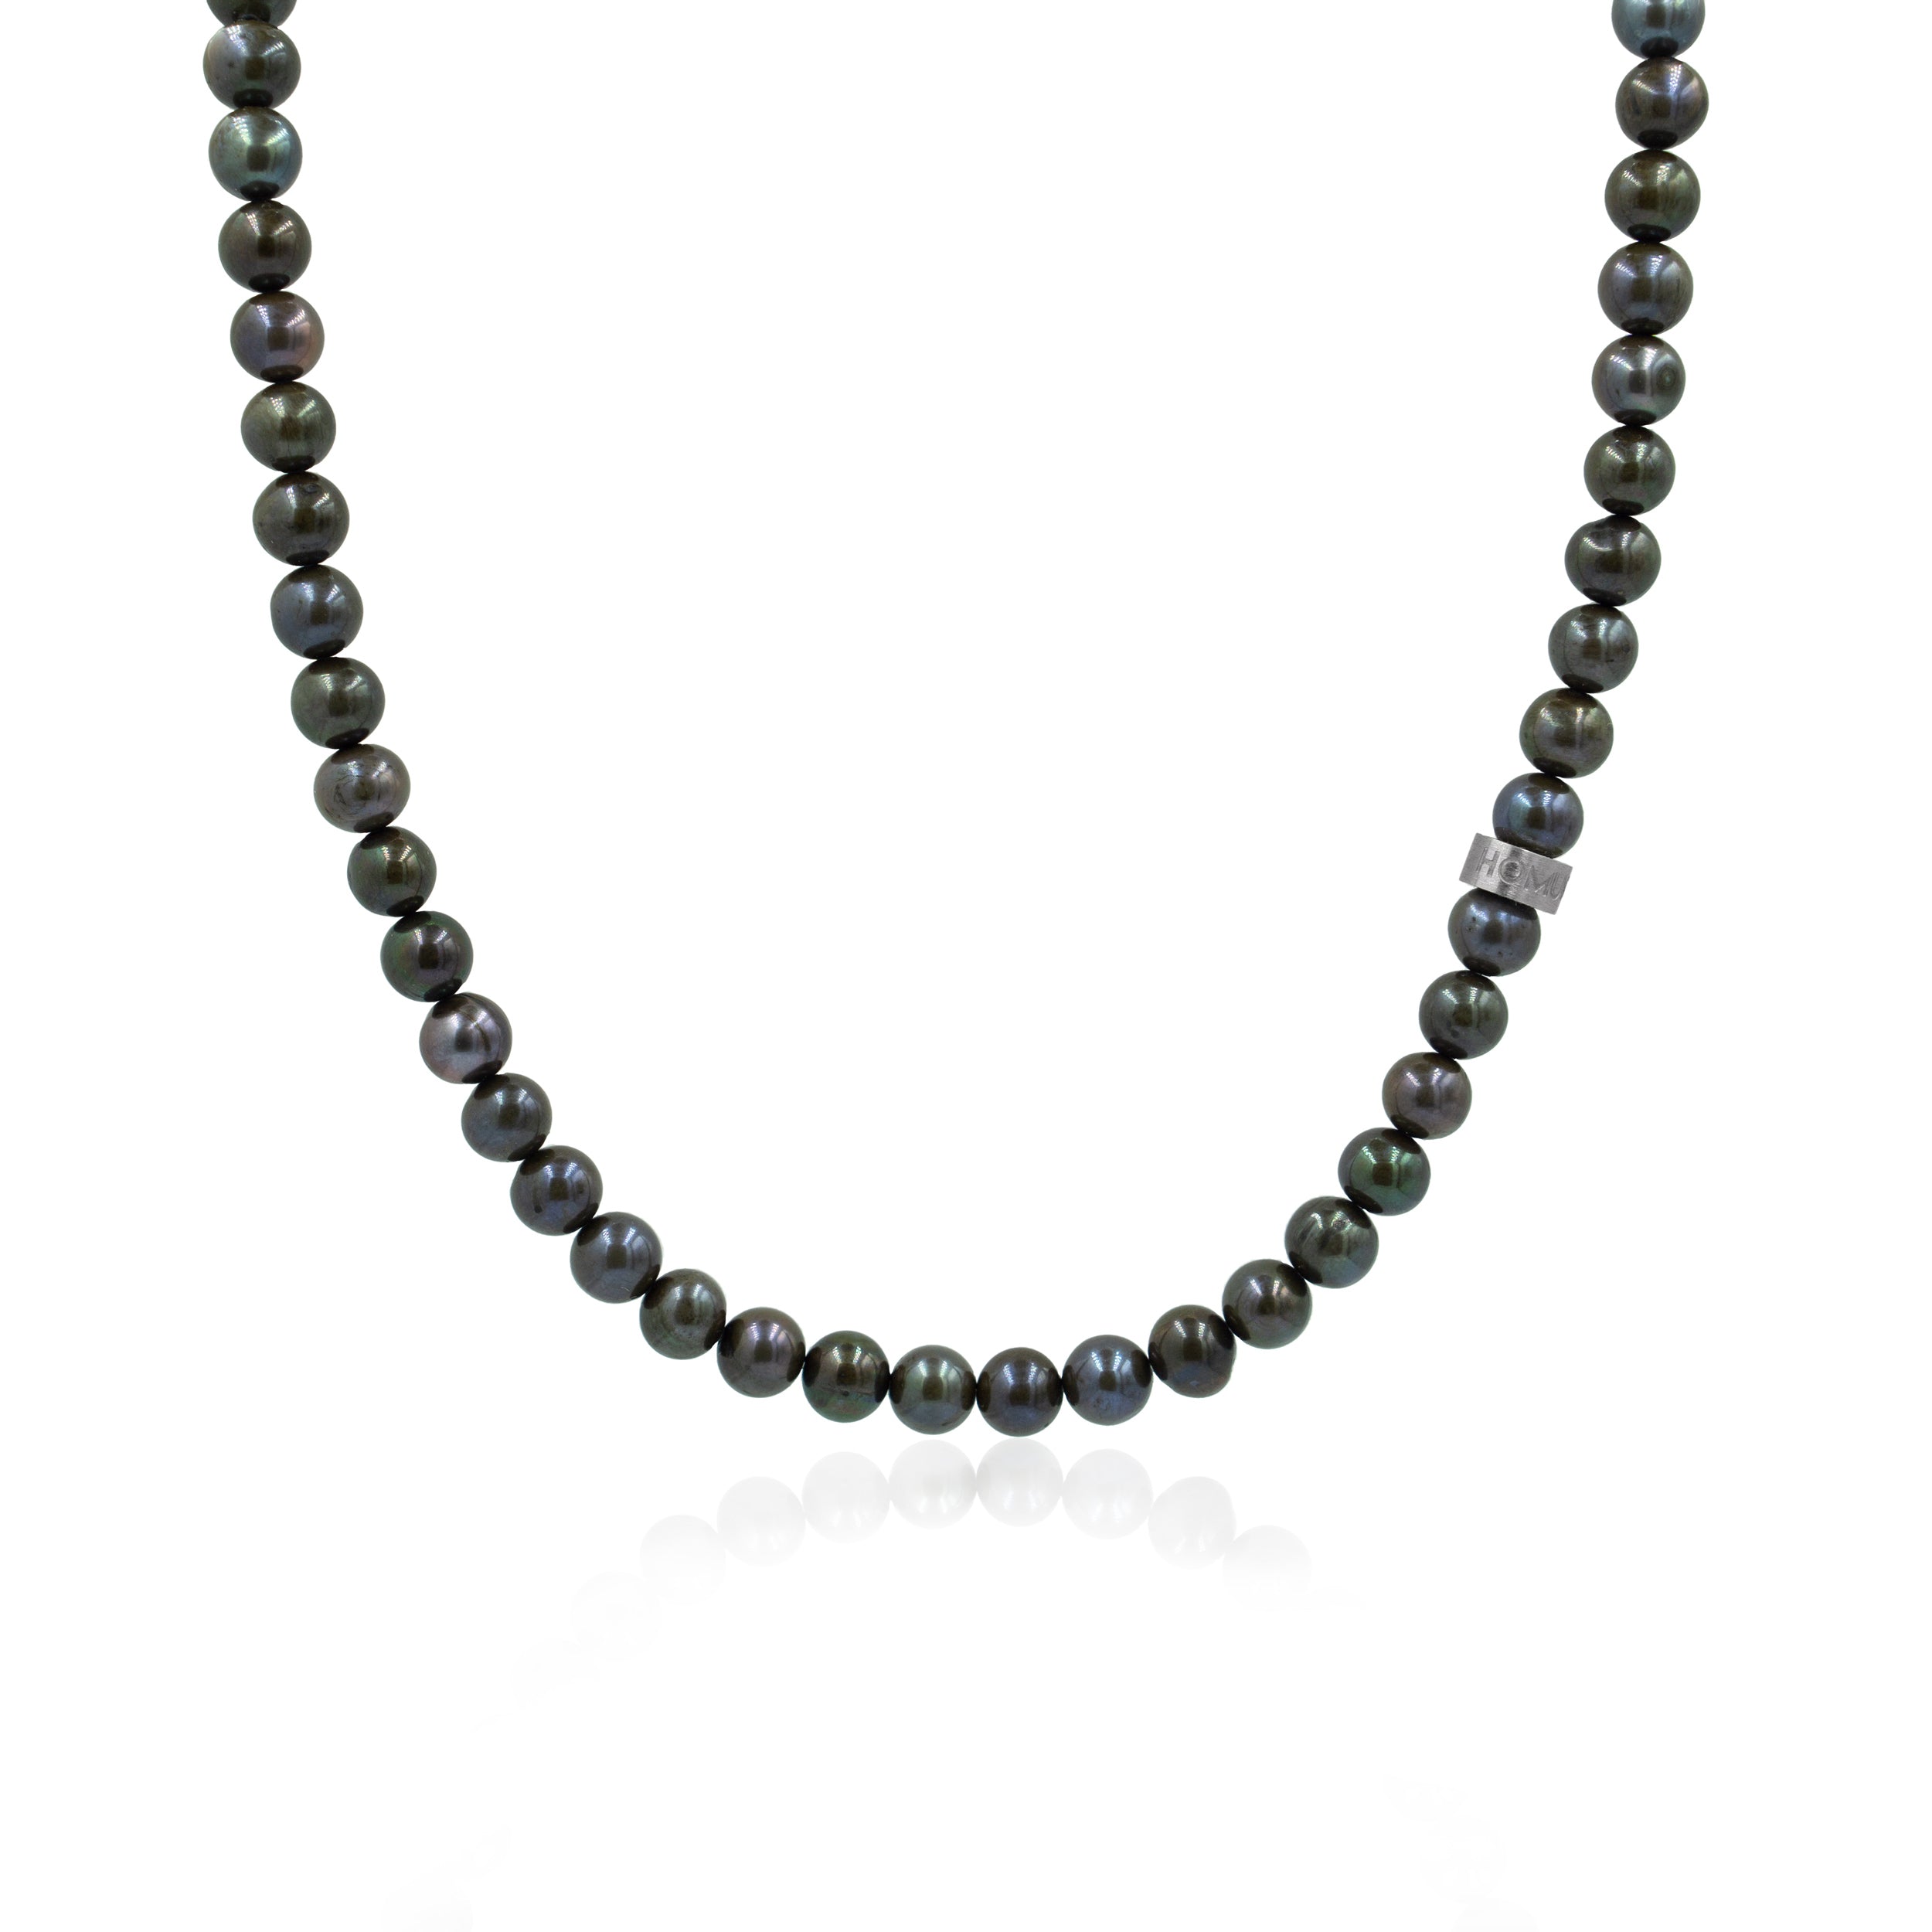 Cardinal® Oyster Black Pearls